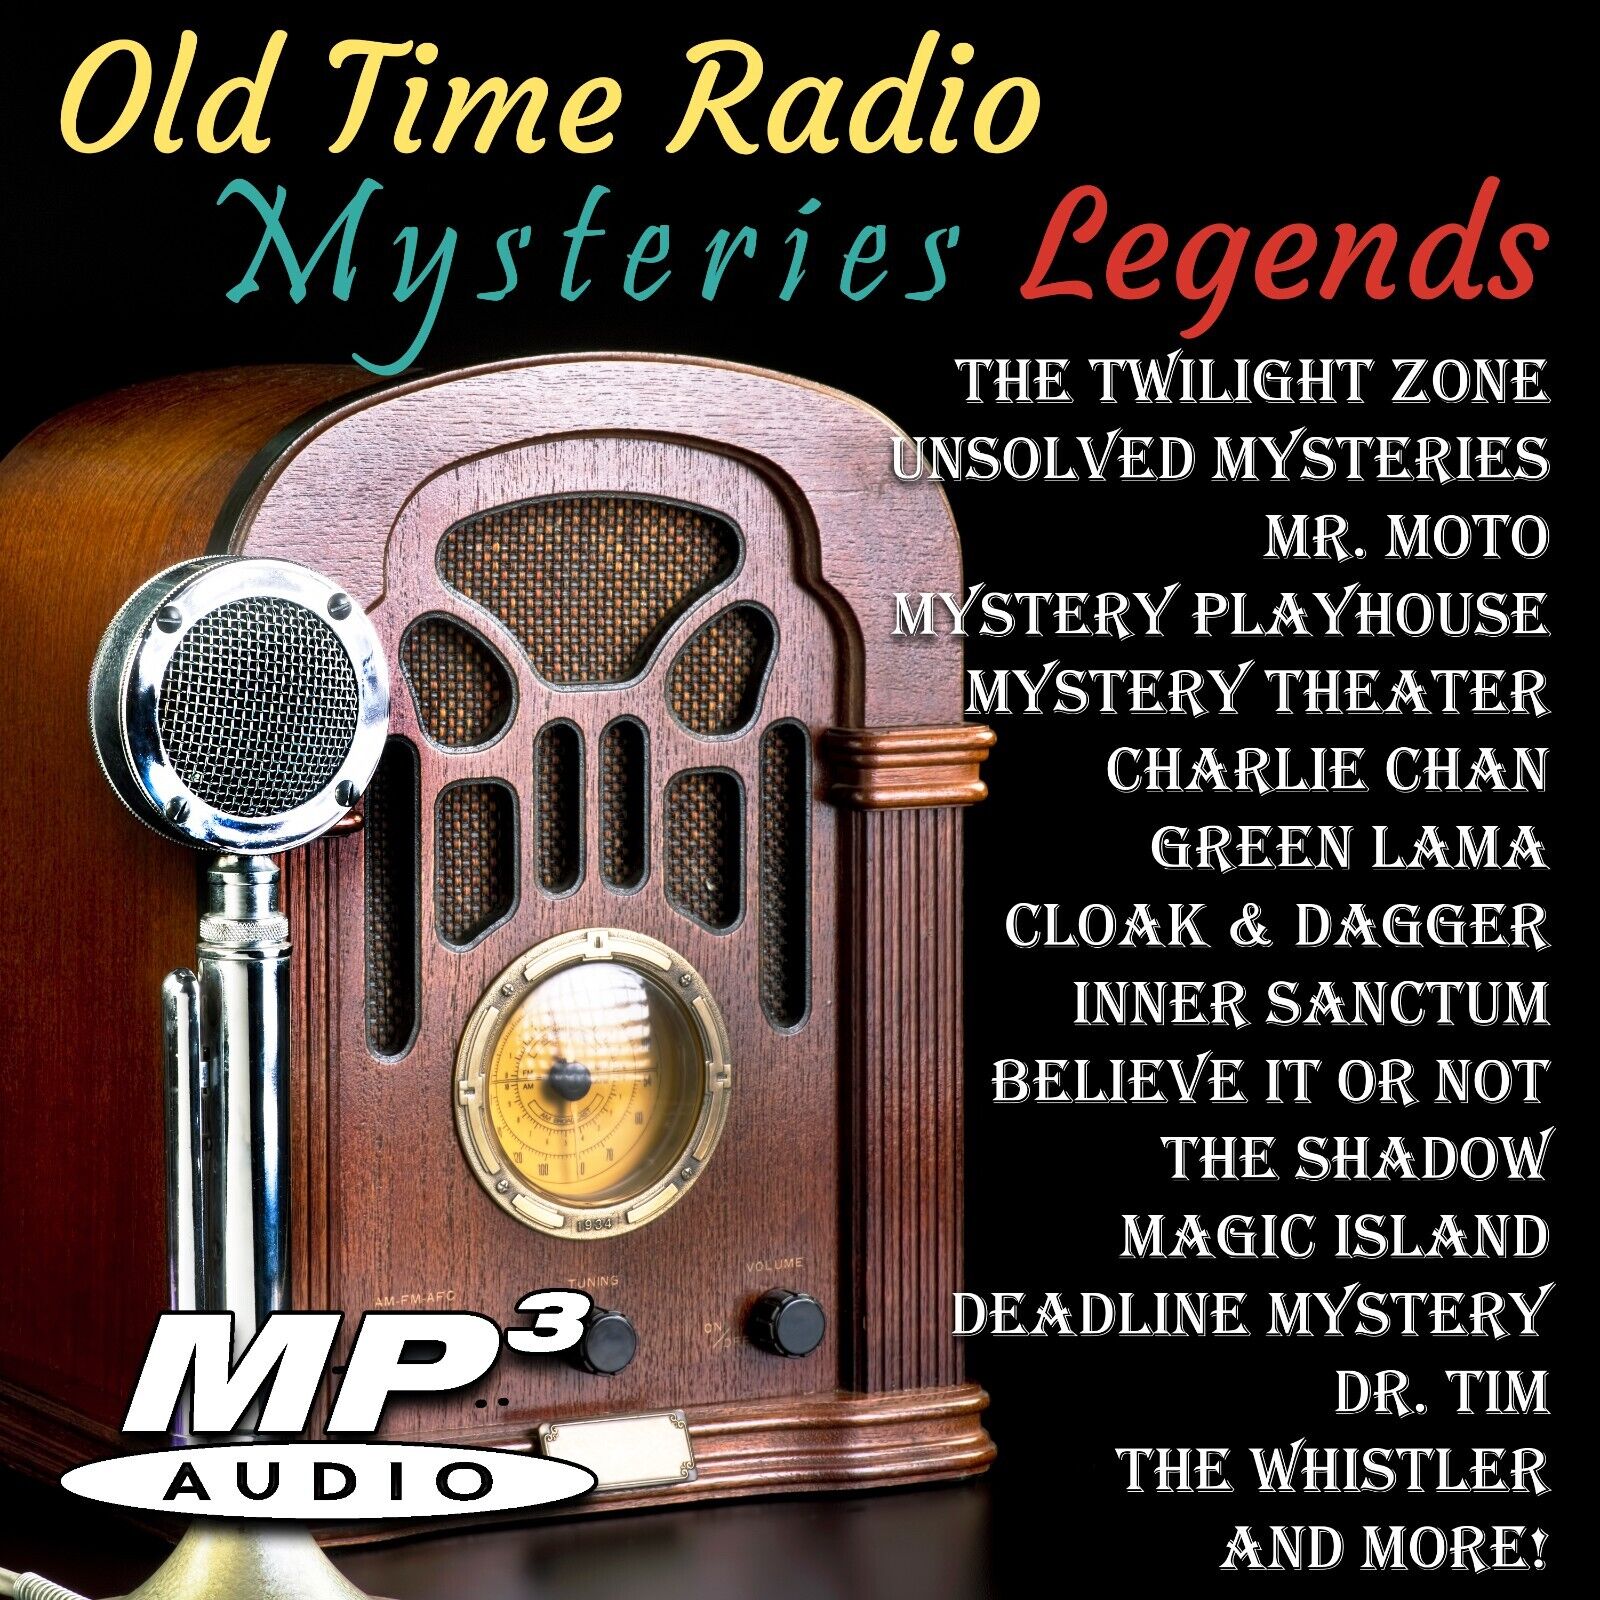 Old Time Radio Mysteries Legends on USB Flash Drive Over 4,000 shows